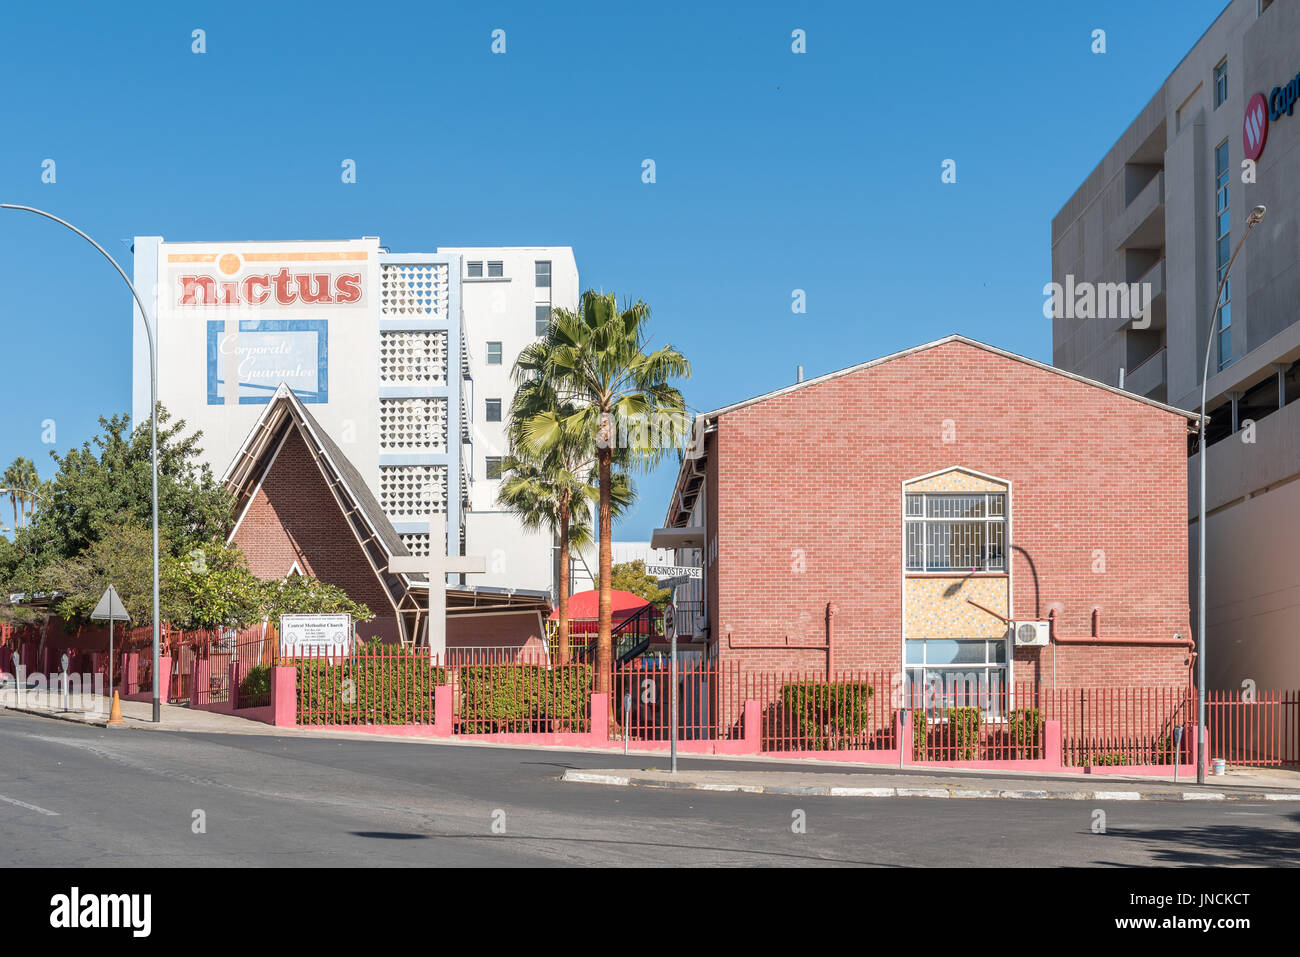 WINDHOEK, NAMIBIA - JUNE 17, 2017: The Central Methodist Church in Windhoek, the capital city of Namibia Stock Photo